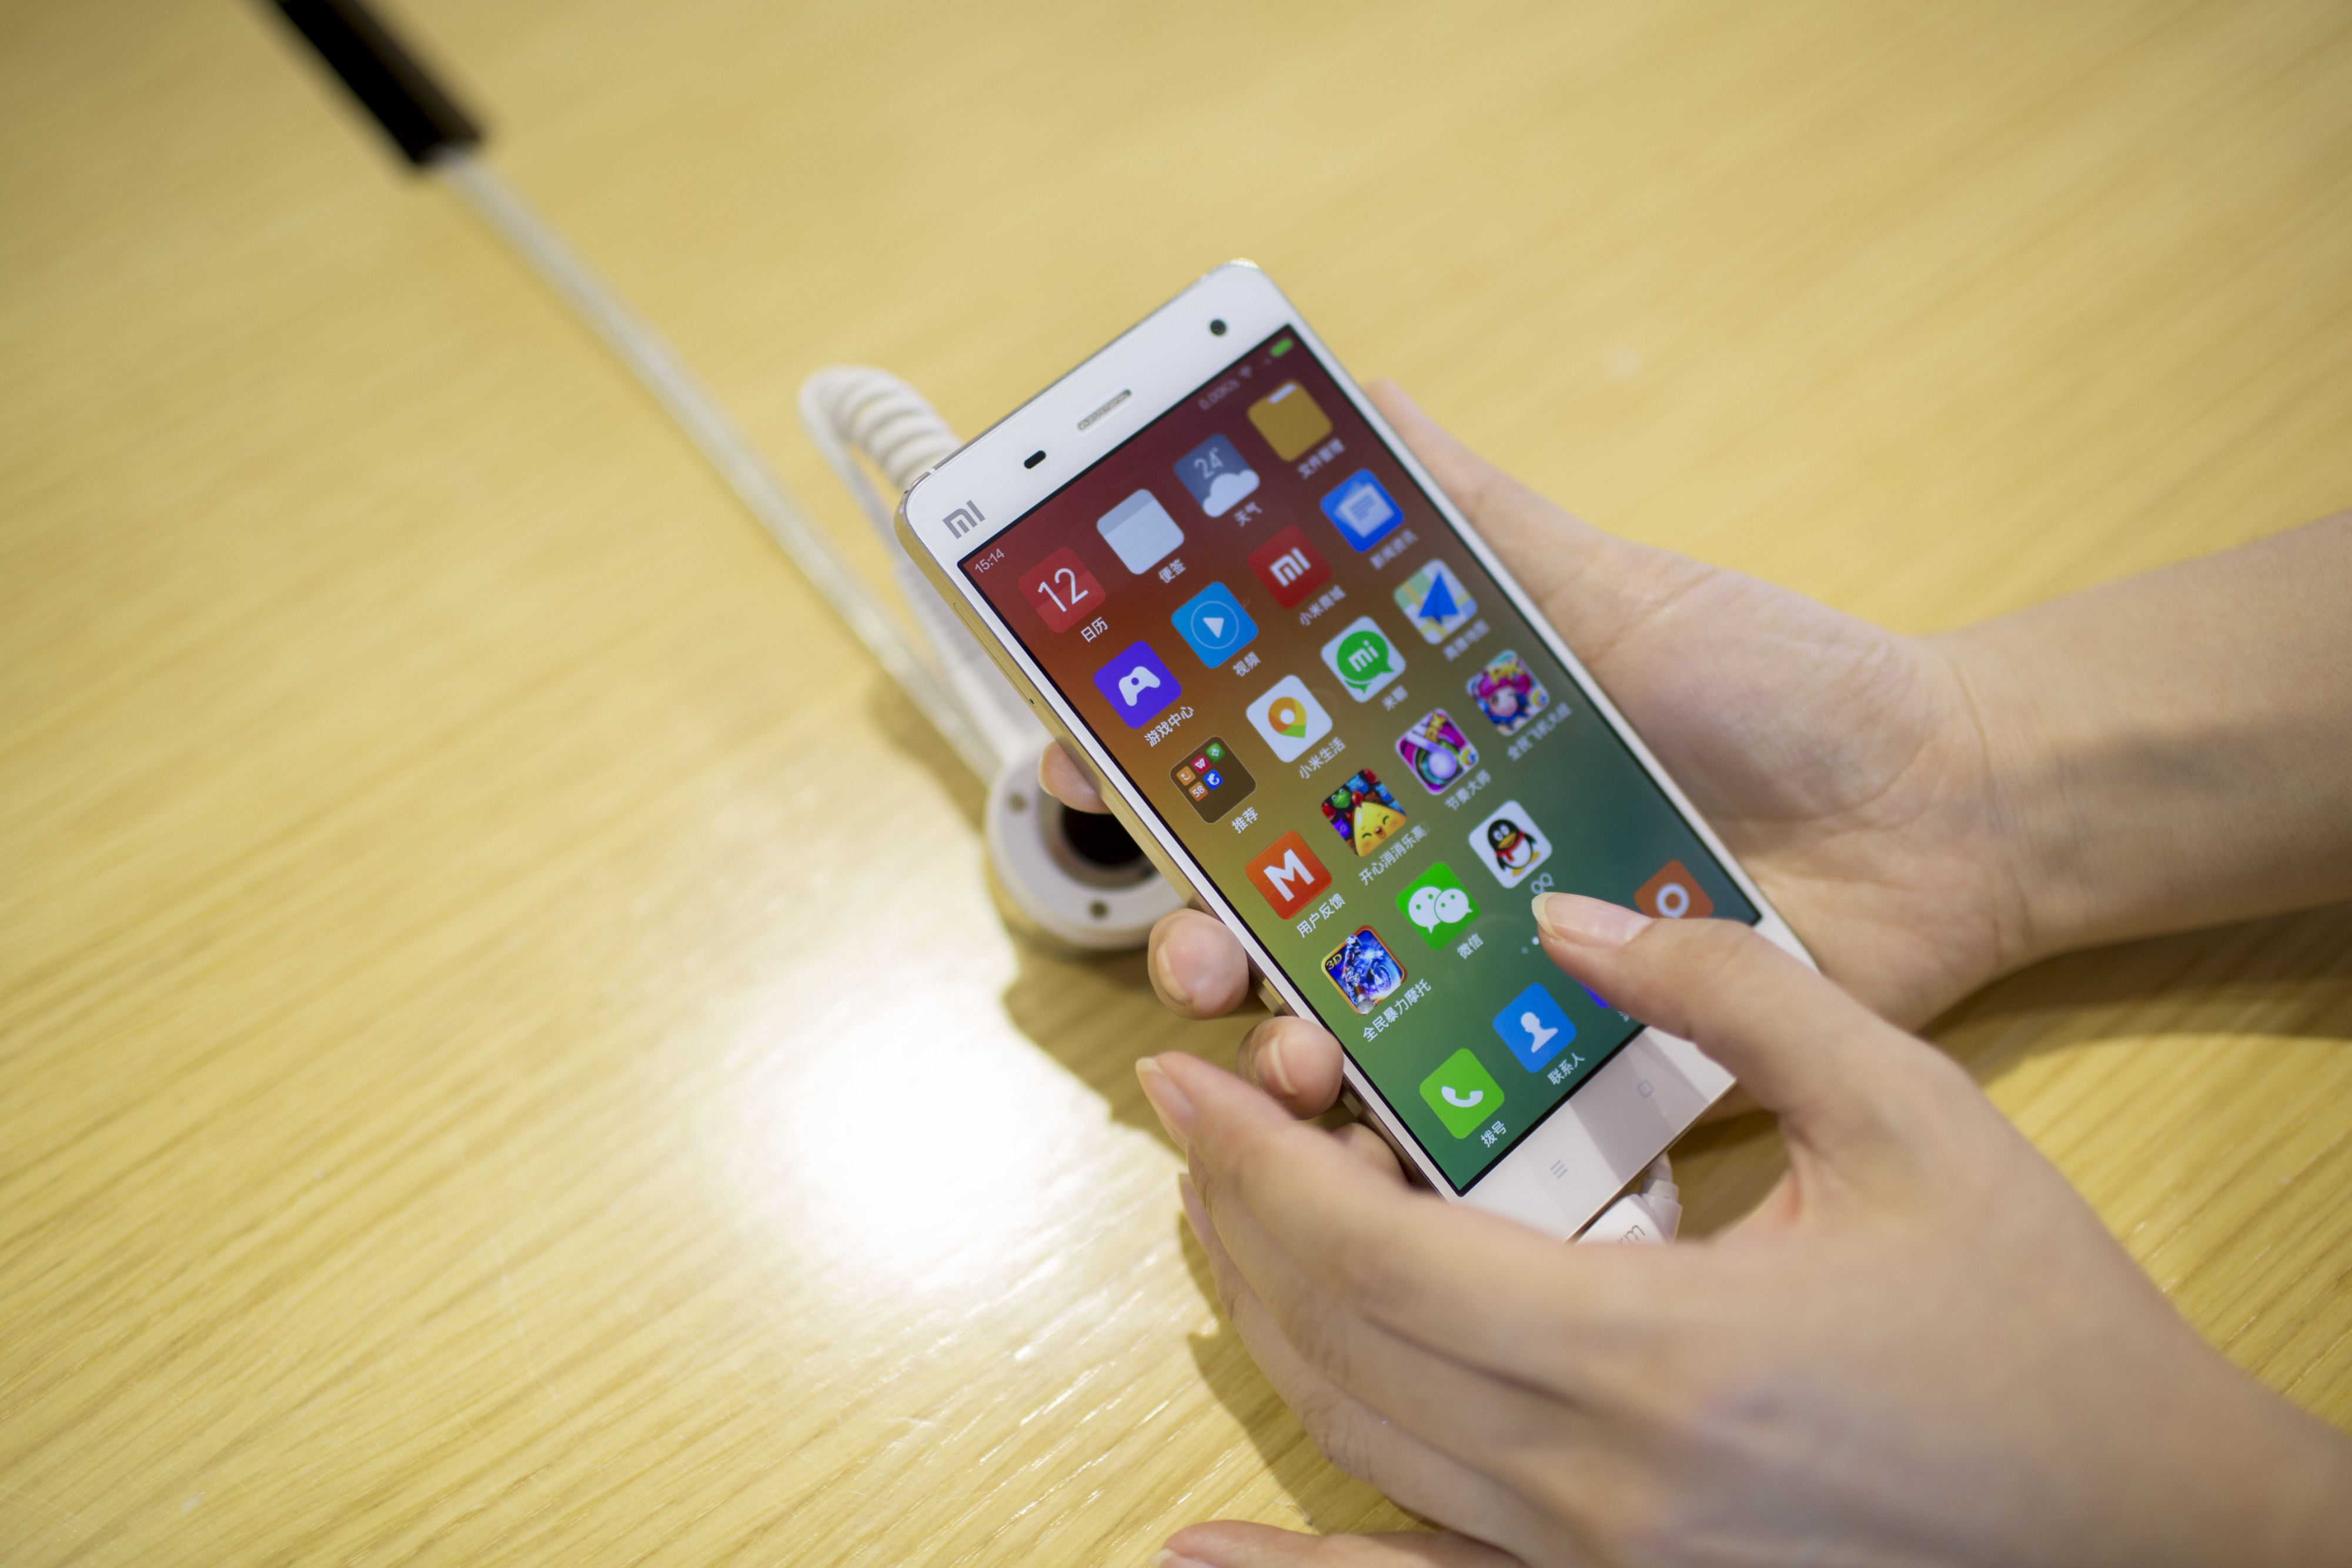 A Xiaomi Corp. Mi 4 smartphone is arranged for a photograph at the company's showroom in Beijing, China, on Sept. 12, 2014. (Bloomberg via Getty Images)